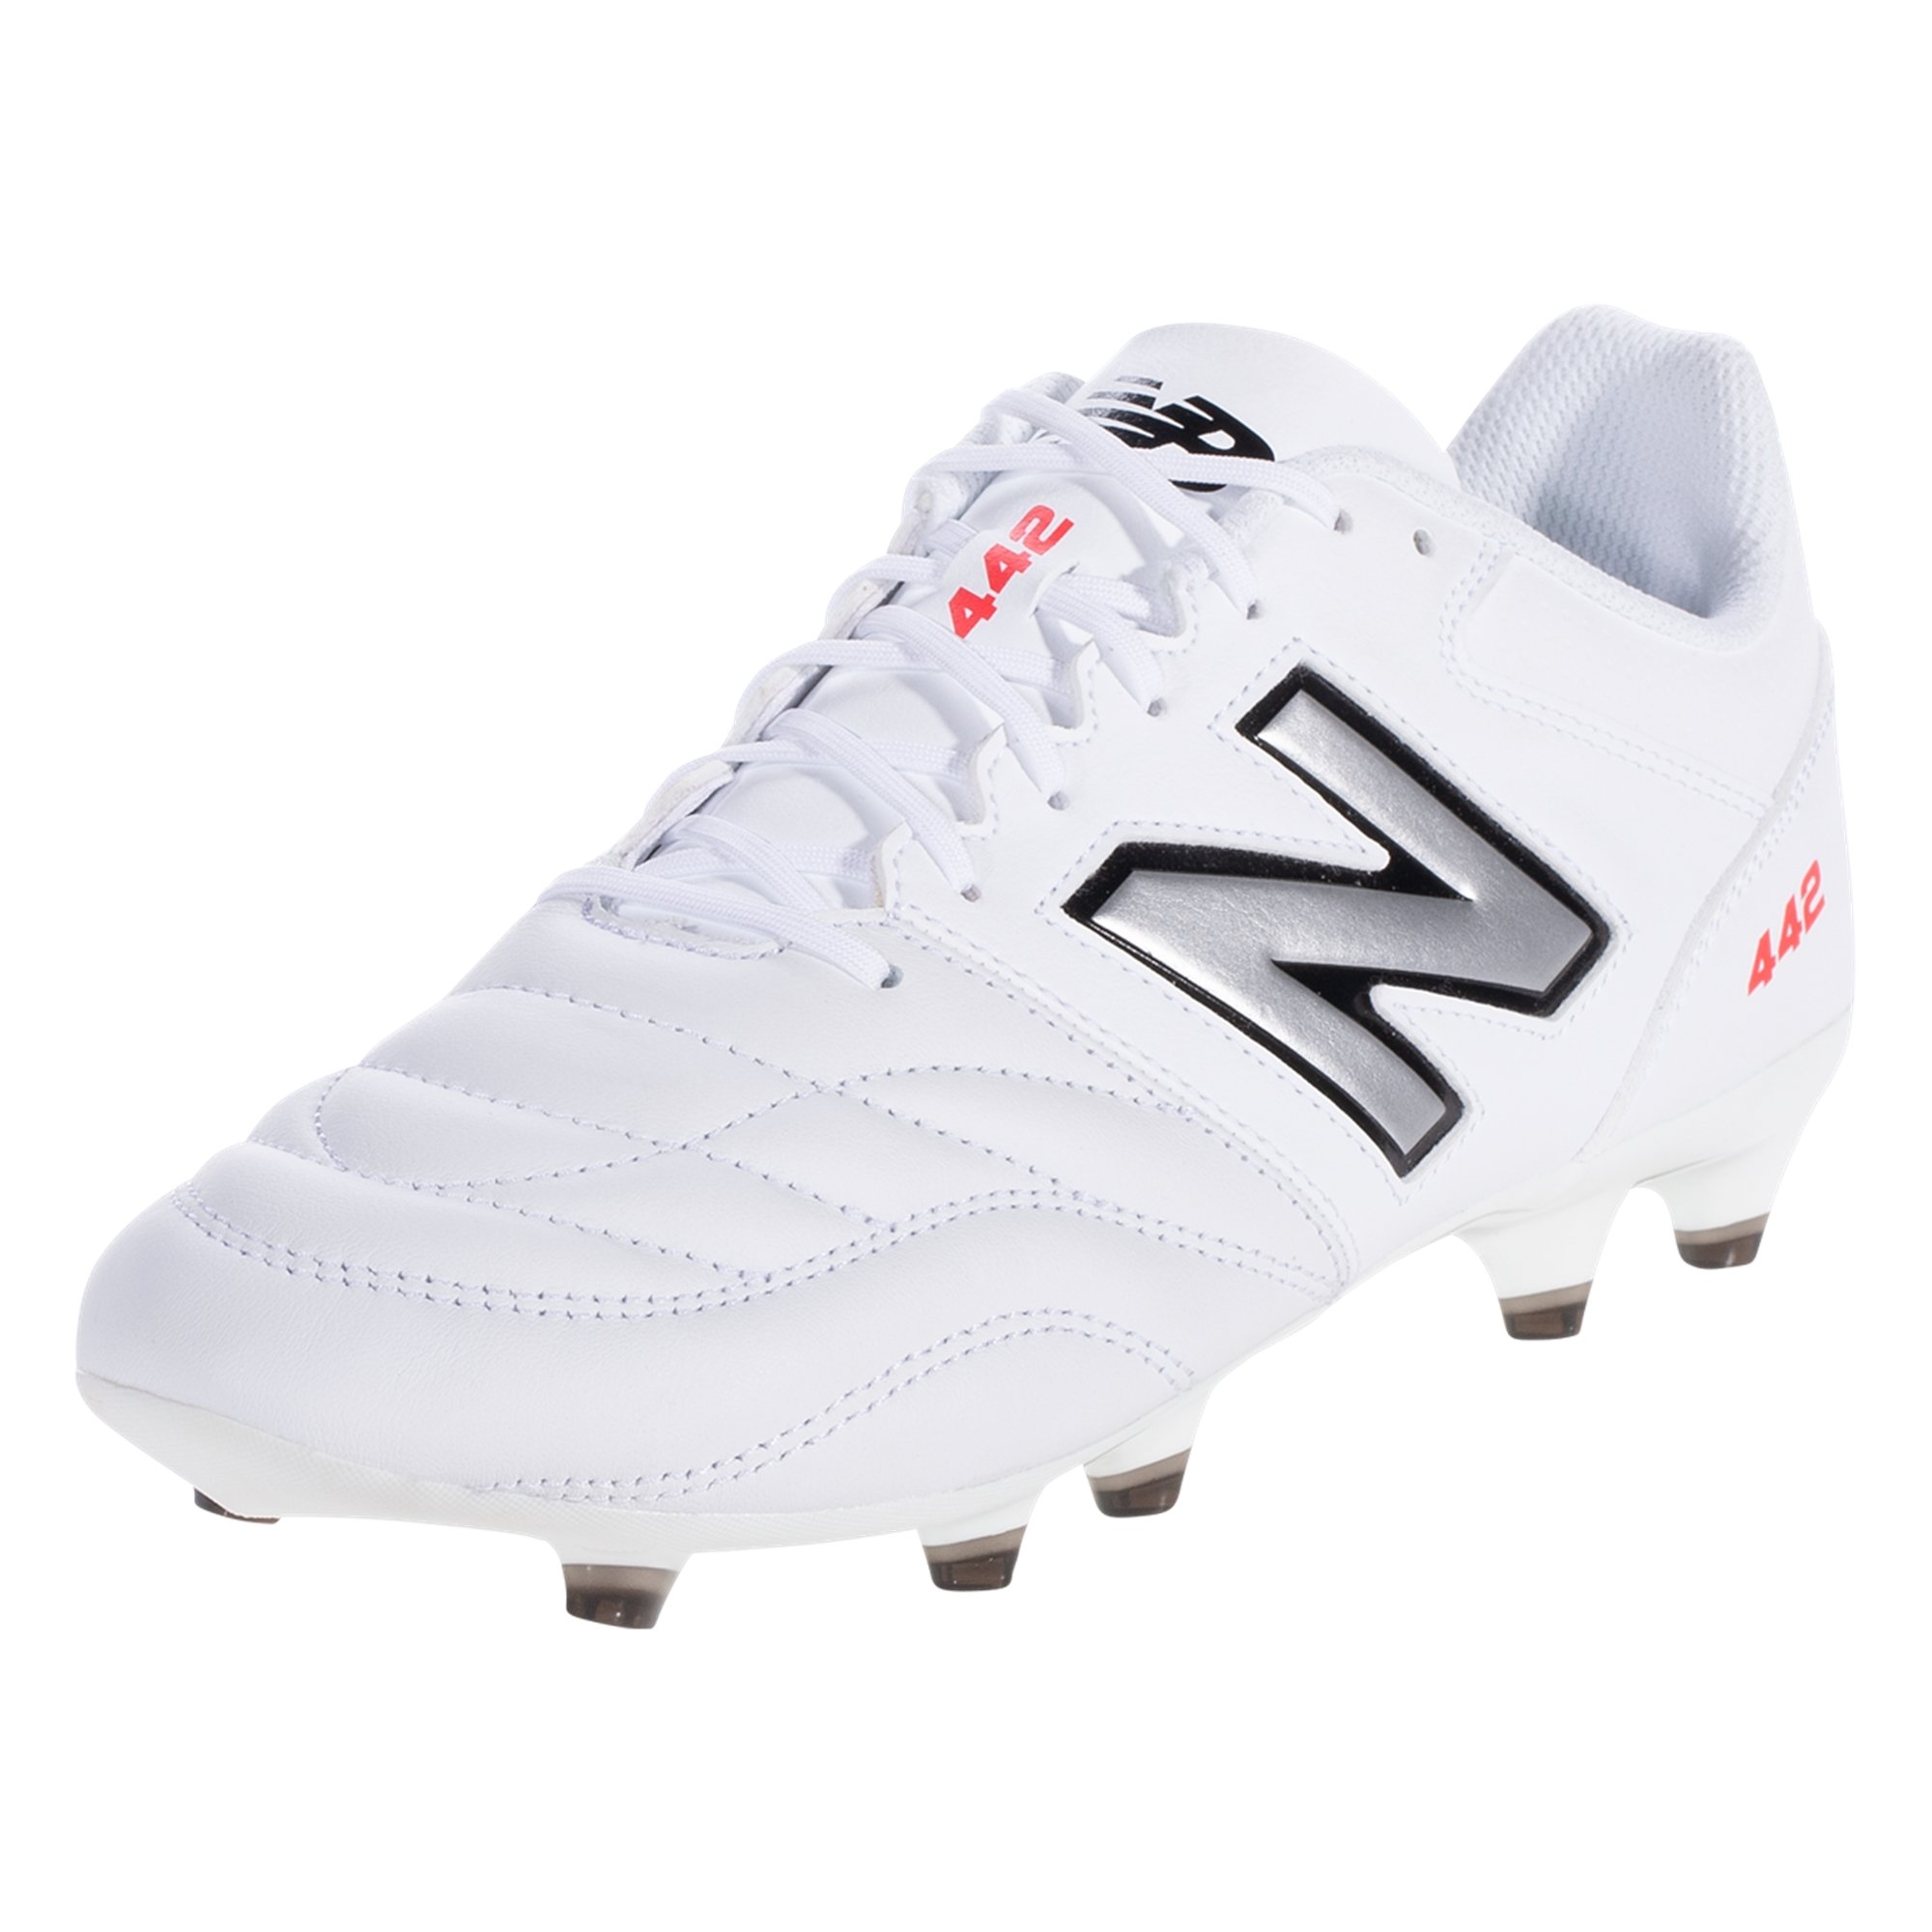 New Balance 442 V2 Team Wide (2E) Firm Ground Soccer Cleat